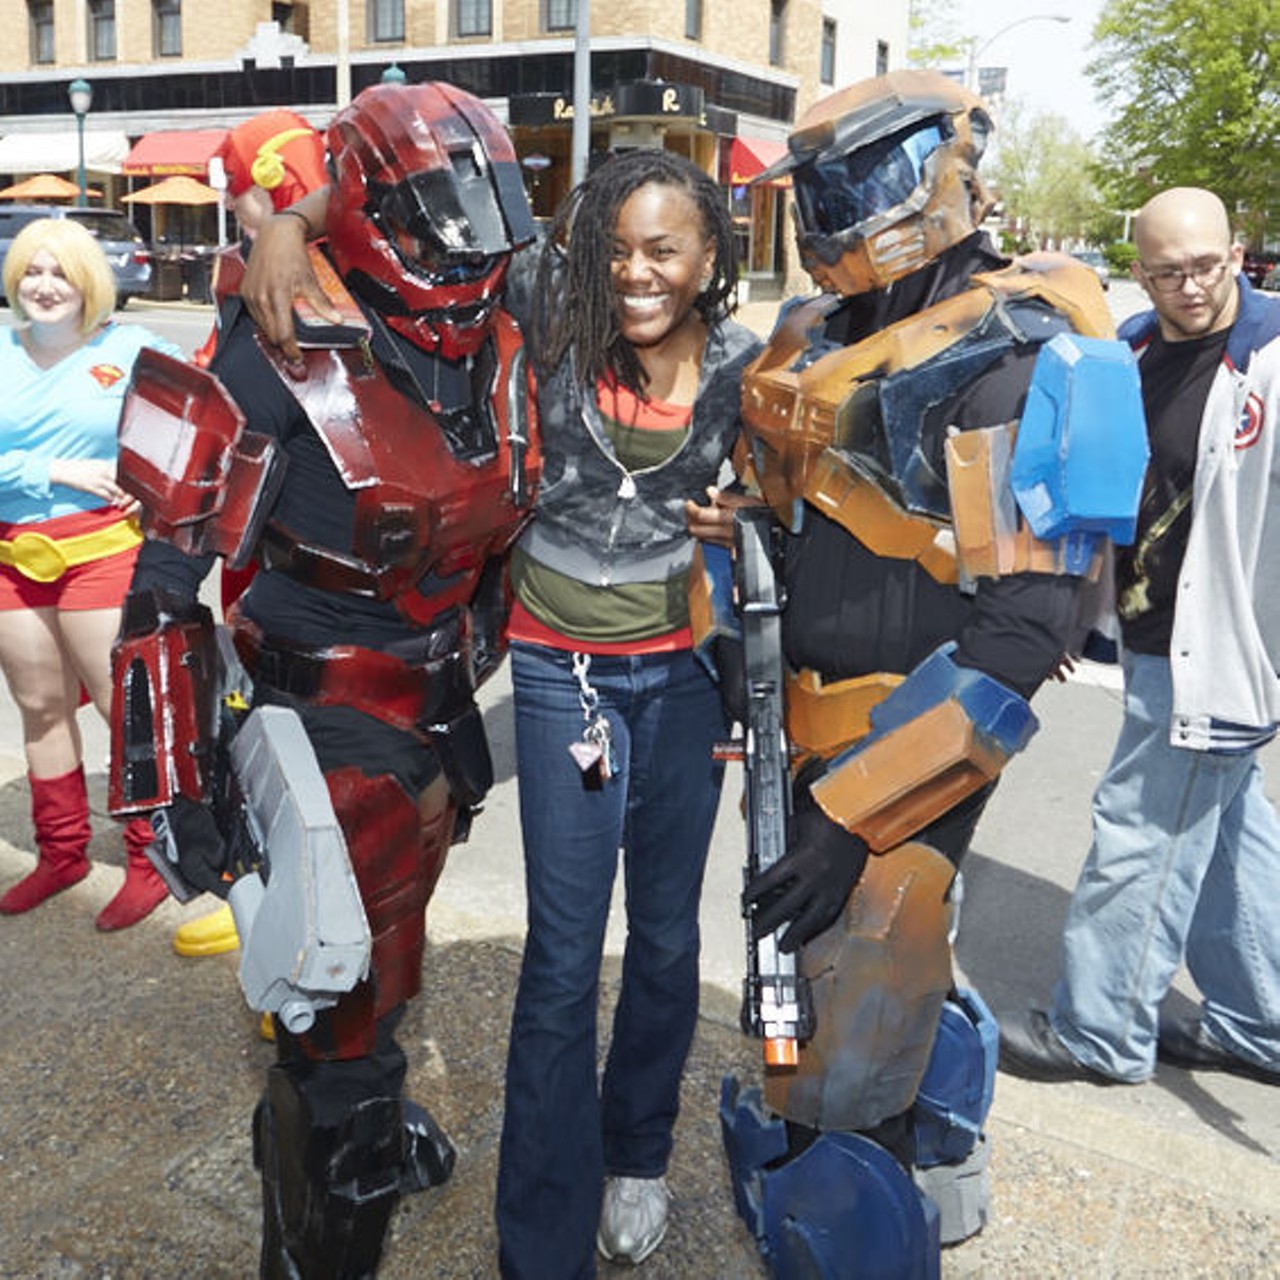 Scenes from Free Comic Book Day 2014 in St. Louis